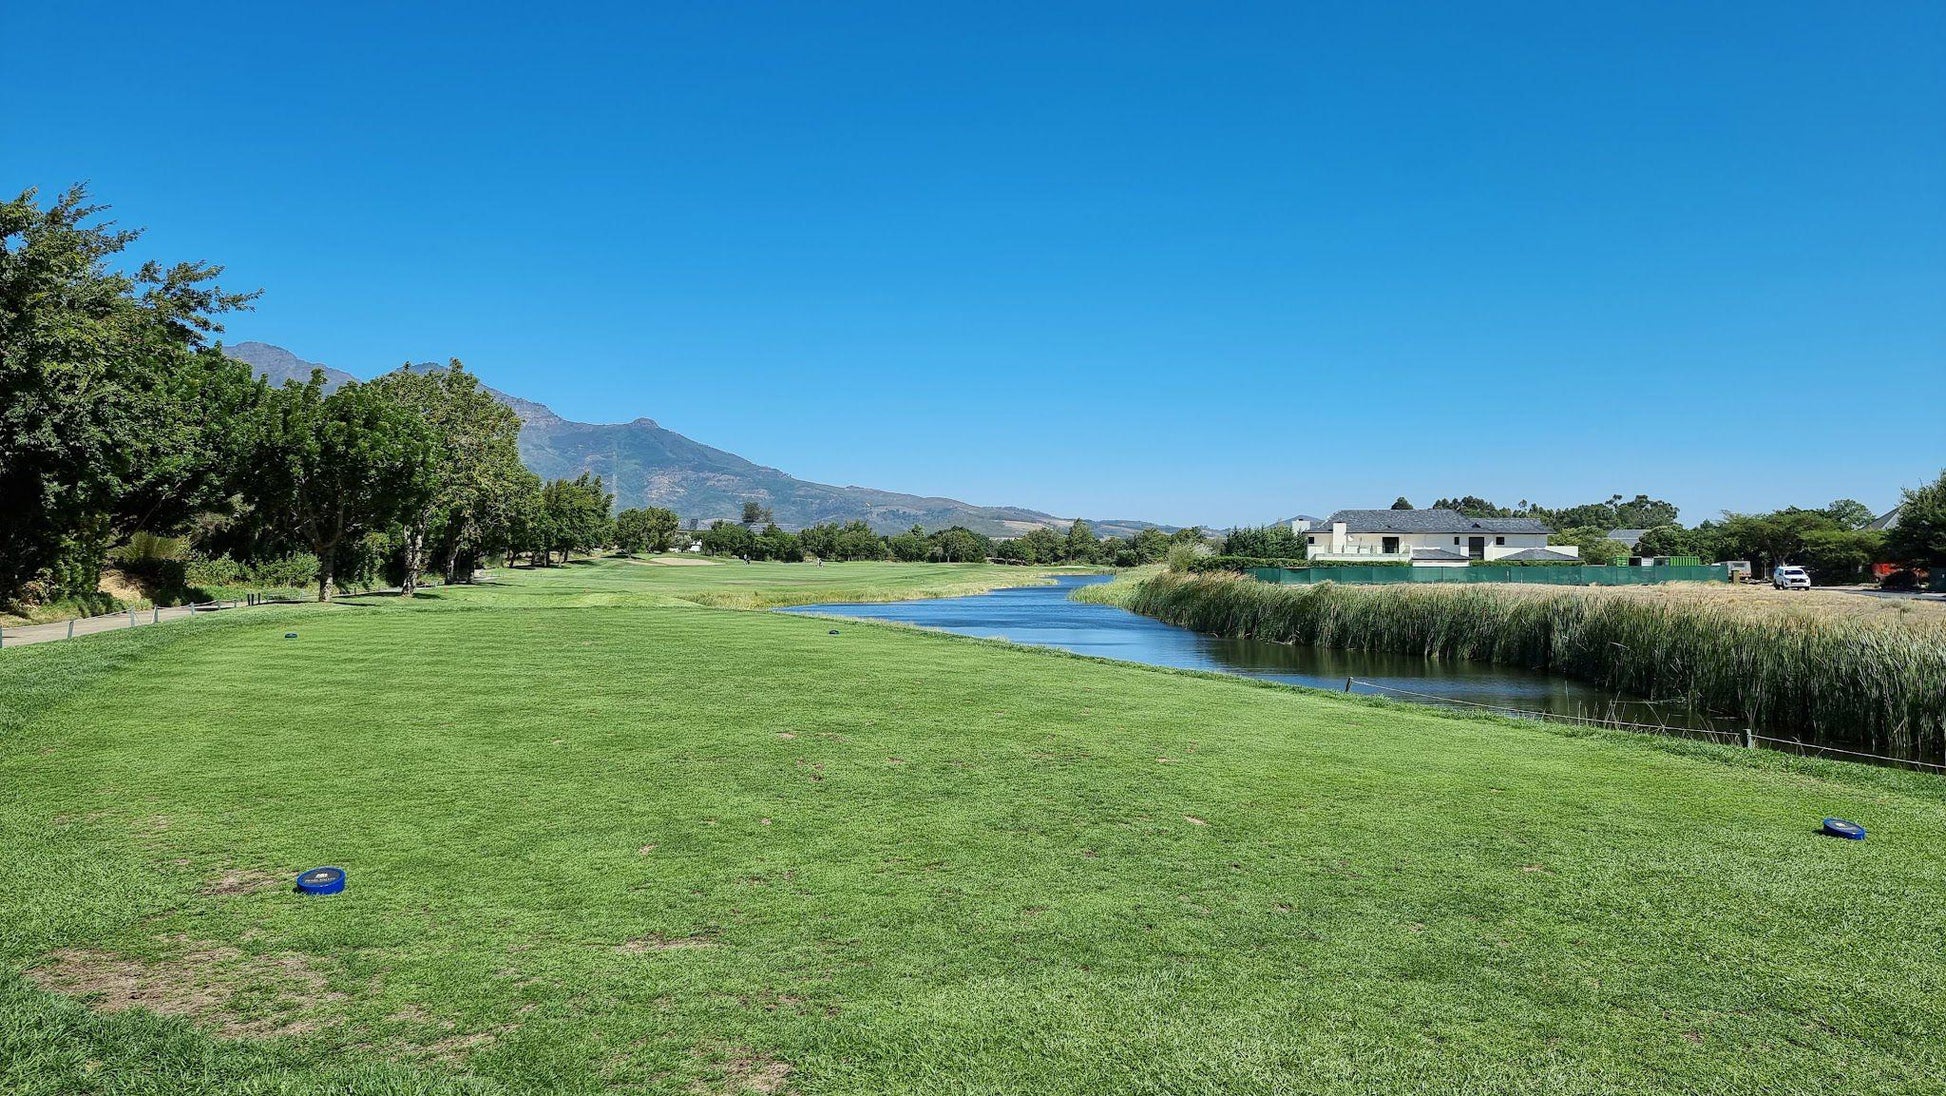 Complementary Colors, Ball Game, Sport, Golfing, Pearl Valley Jack Nicklaus Signature golf course, Pearl Valley Jack Nicklaus Signature golf course R301 Wemmershoek, Road, Paarl, 7646